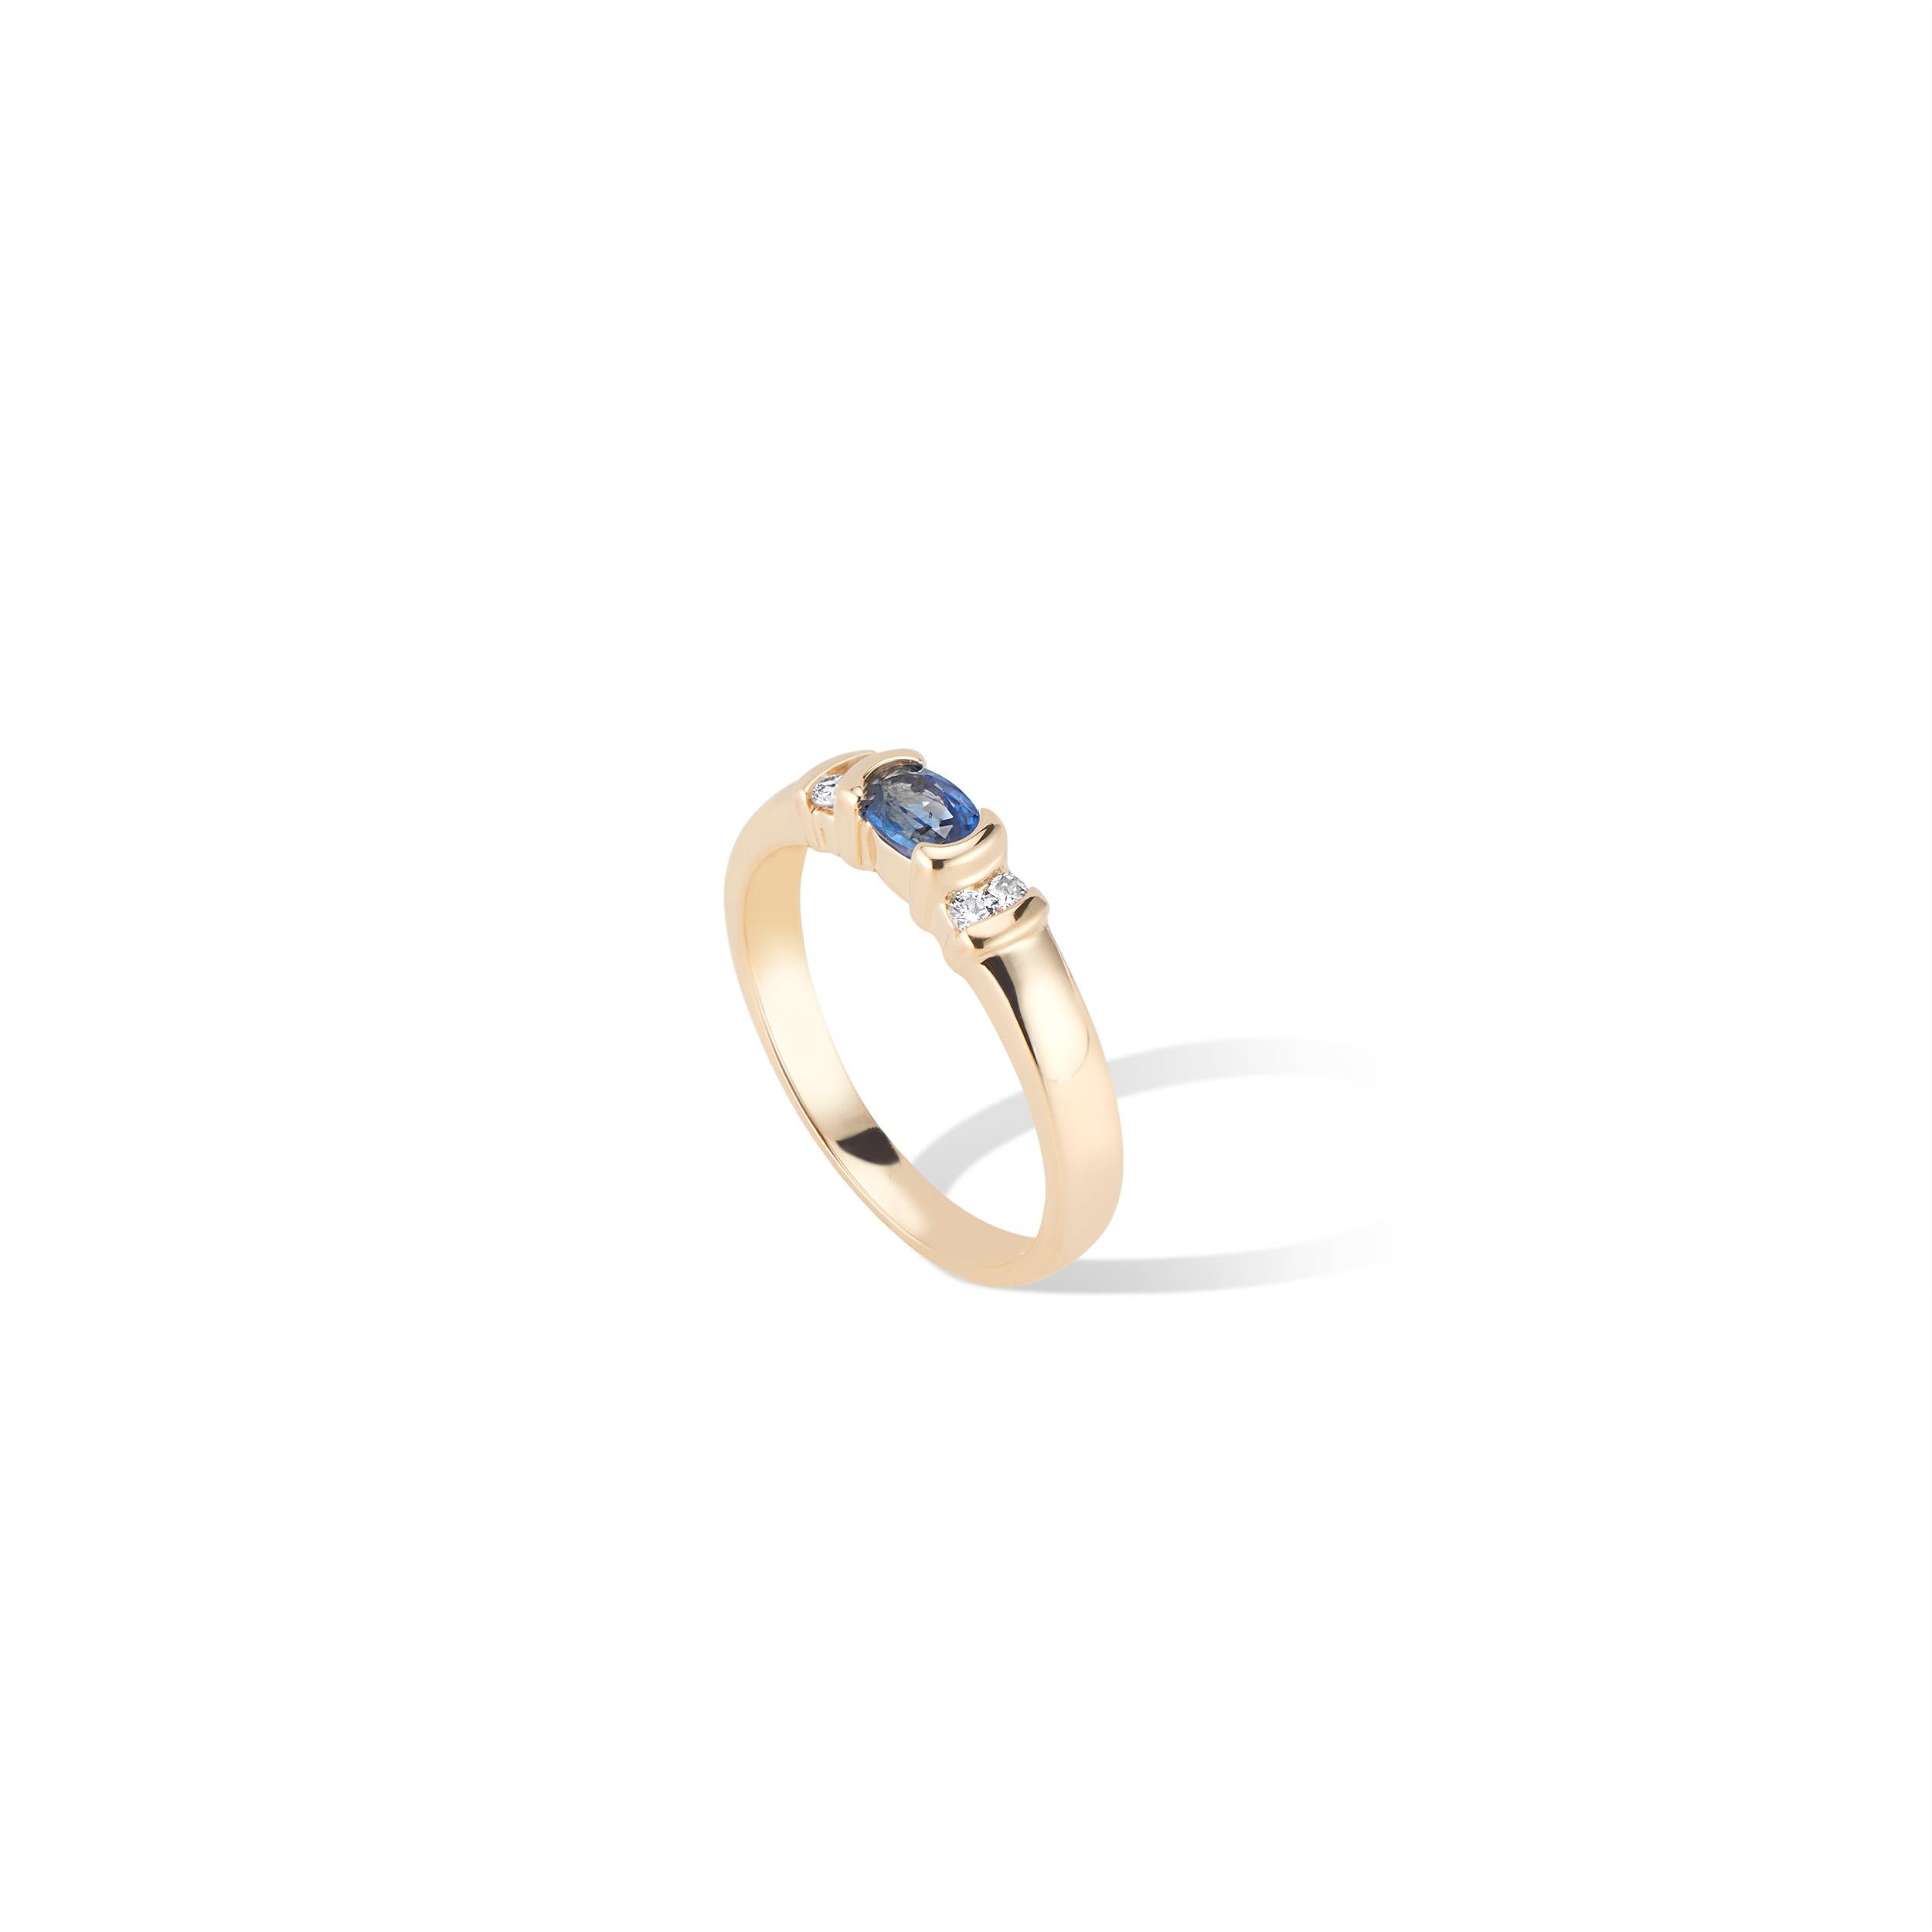 A darling vintage find from the 1980’s  - this perfect oval Sapphire Diamond Ring.
.35pt Sapphire set East to West in a bezel setting with 2 sparkling diamonds on each side.
The band has beautiful full curve 3.2mm at shoulder graduating down to a